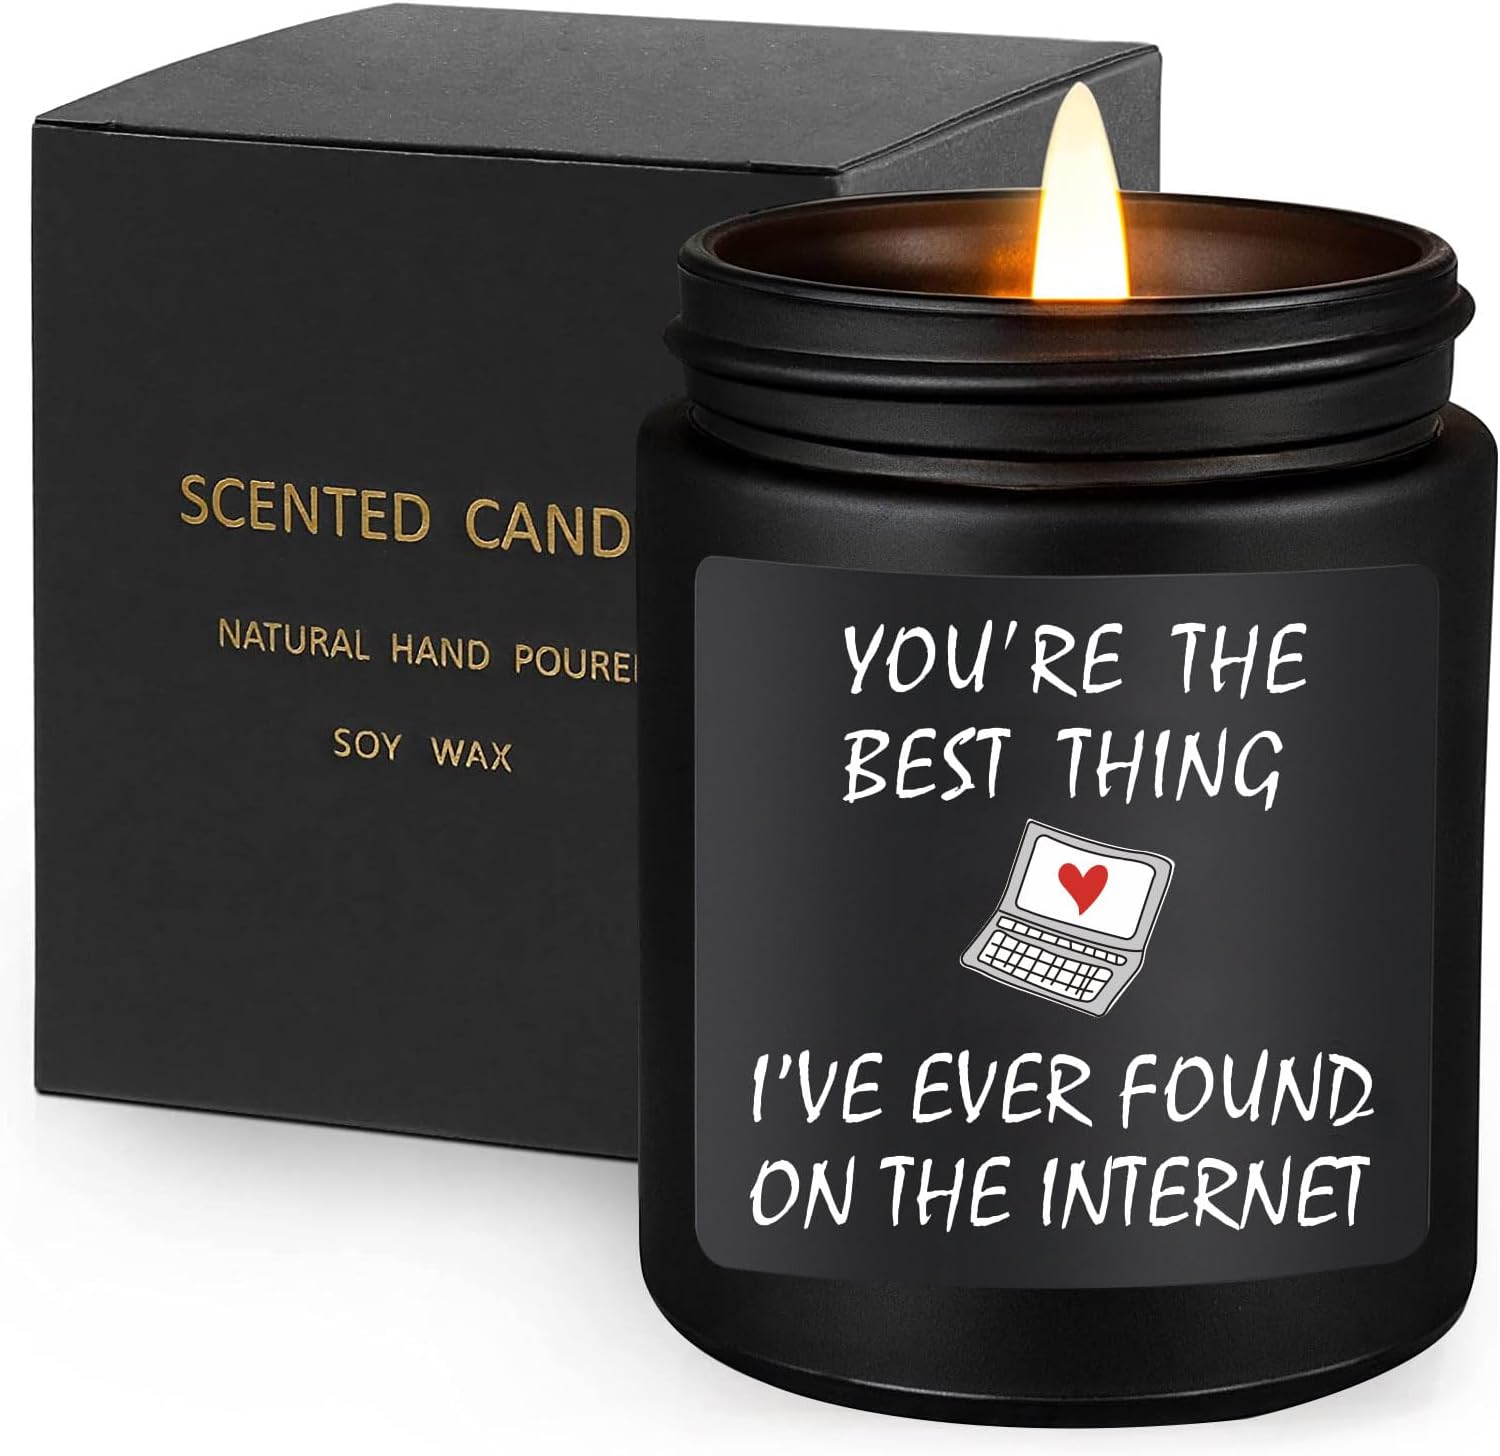 Funny Gifts for Men, Gifts for Him, Christmas Gifts for Boyfriend Men, Anniversary Romantic Gifts for Him Boyfriend Husband,Candles Gifts for Men, Long Burning & Highly Scented